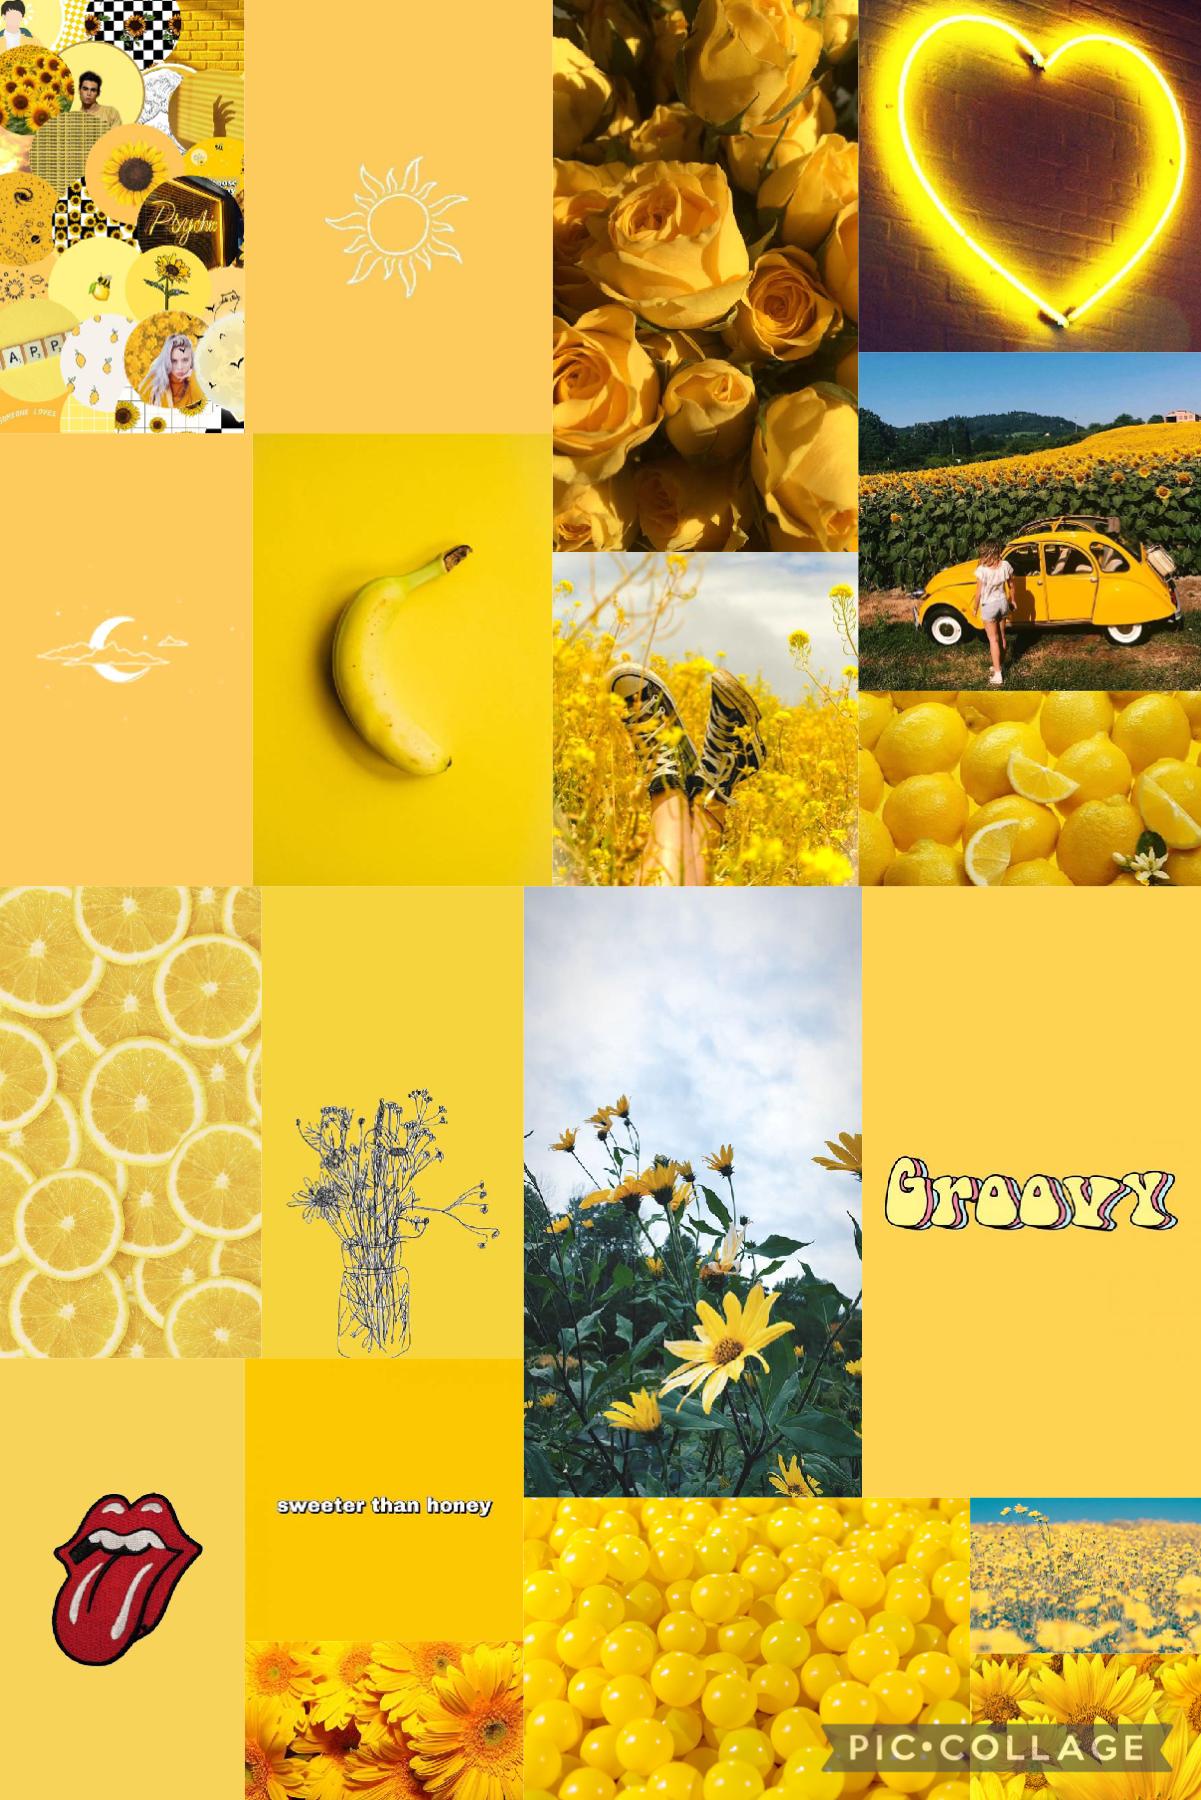 💛🌻🐝Tap🐝🌻💛
Here’s a yellow aesthetic collage! Put in the comments if you have any ideas!